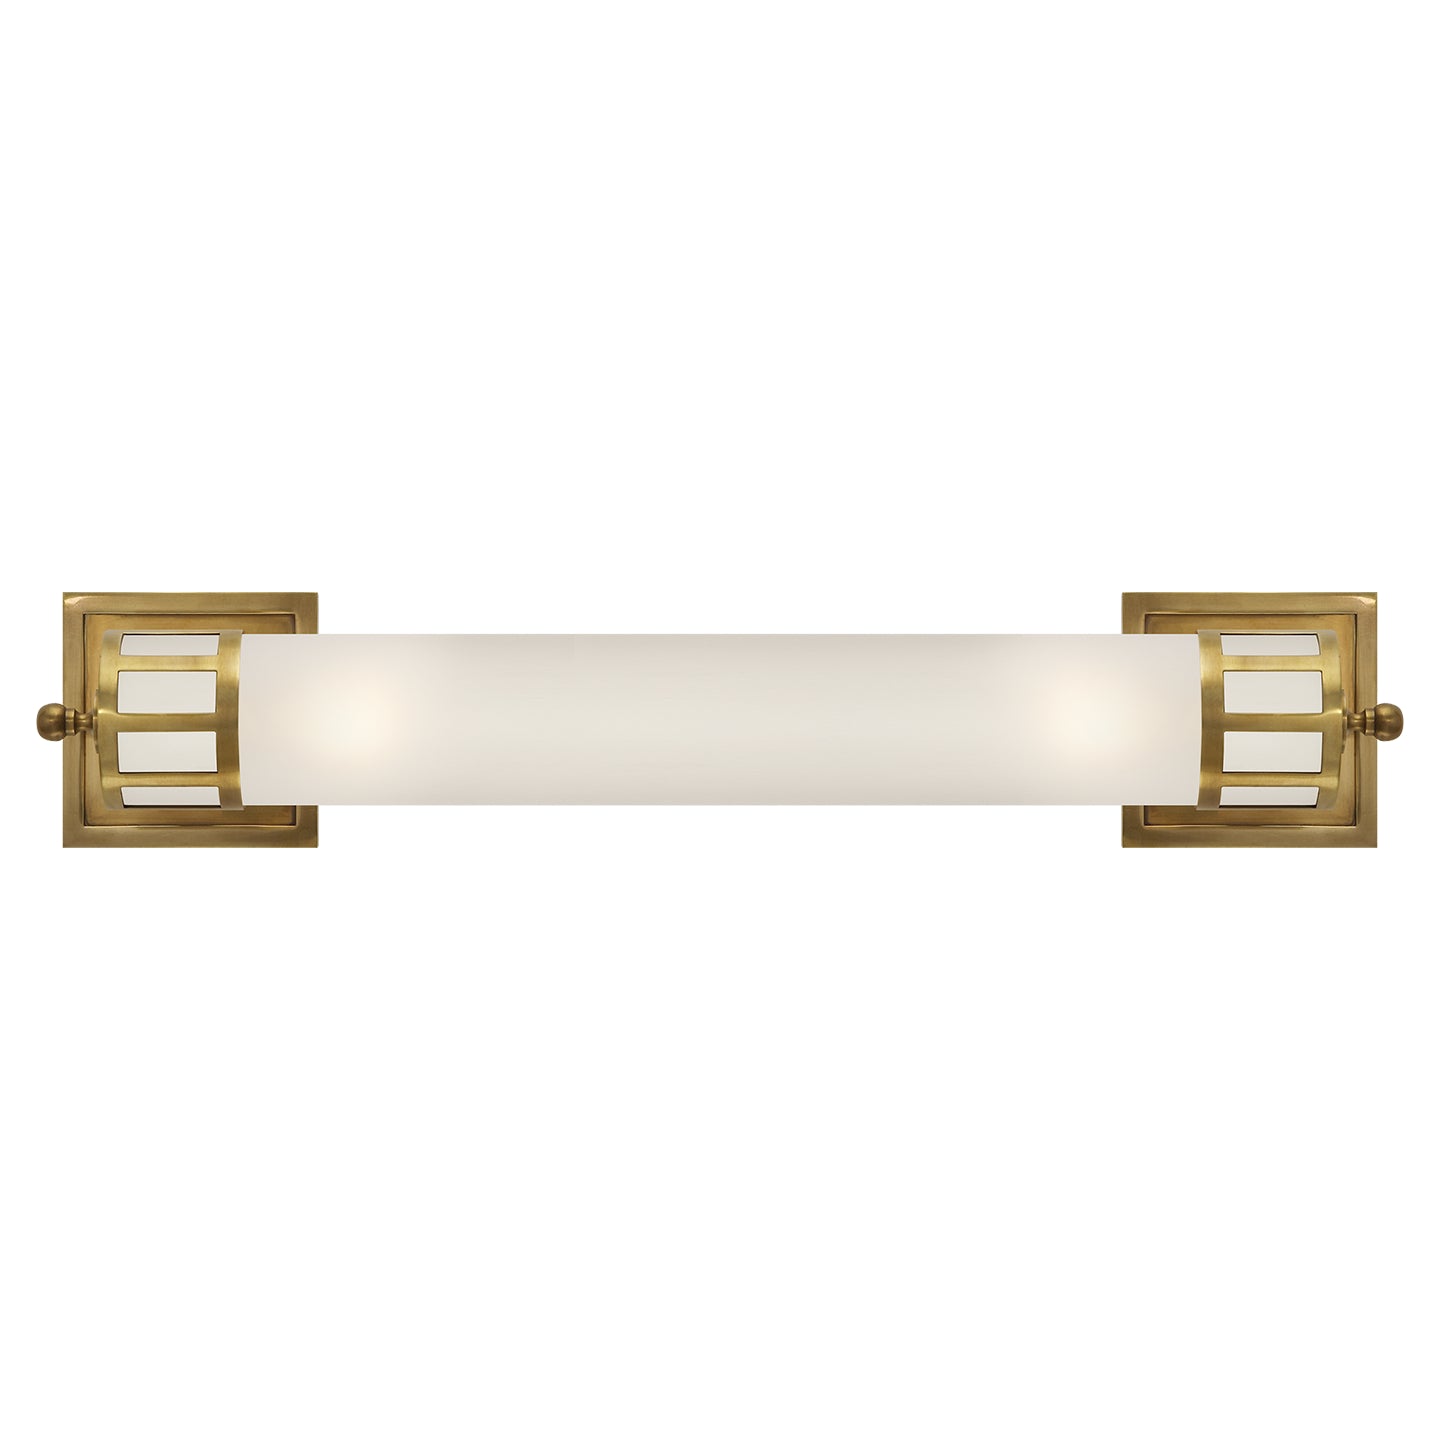 Load image into Gallery viewer, Visual Comfort Signature - SS 2014HAB-FG - Two Light Wall Sconce - Openwork - Hand-Rubbed Antique Brass
